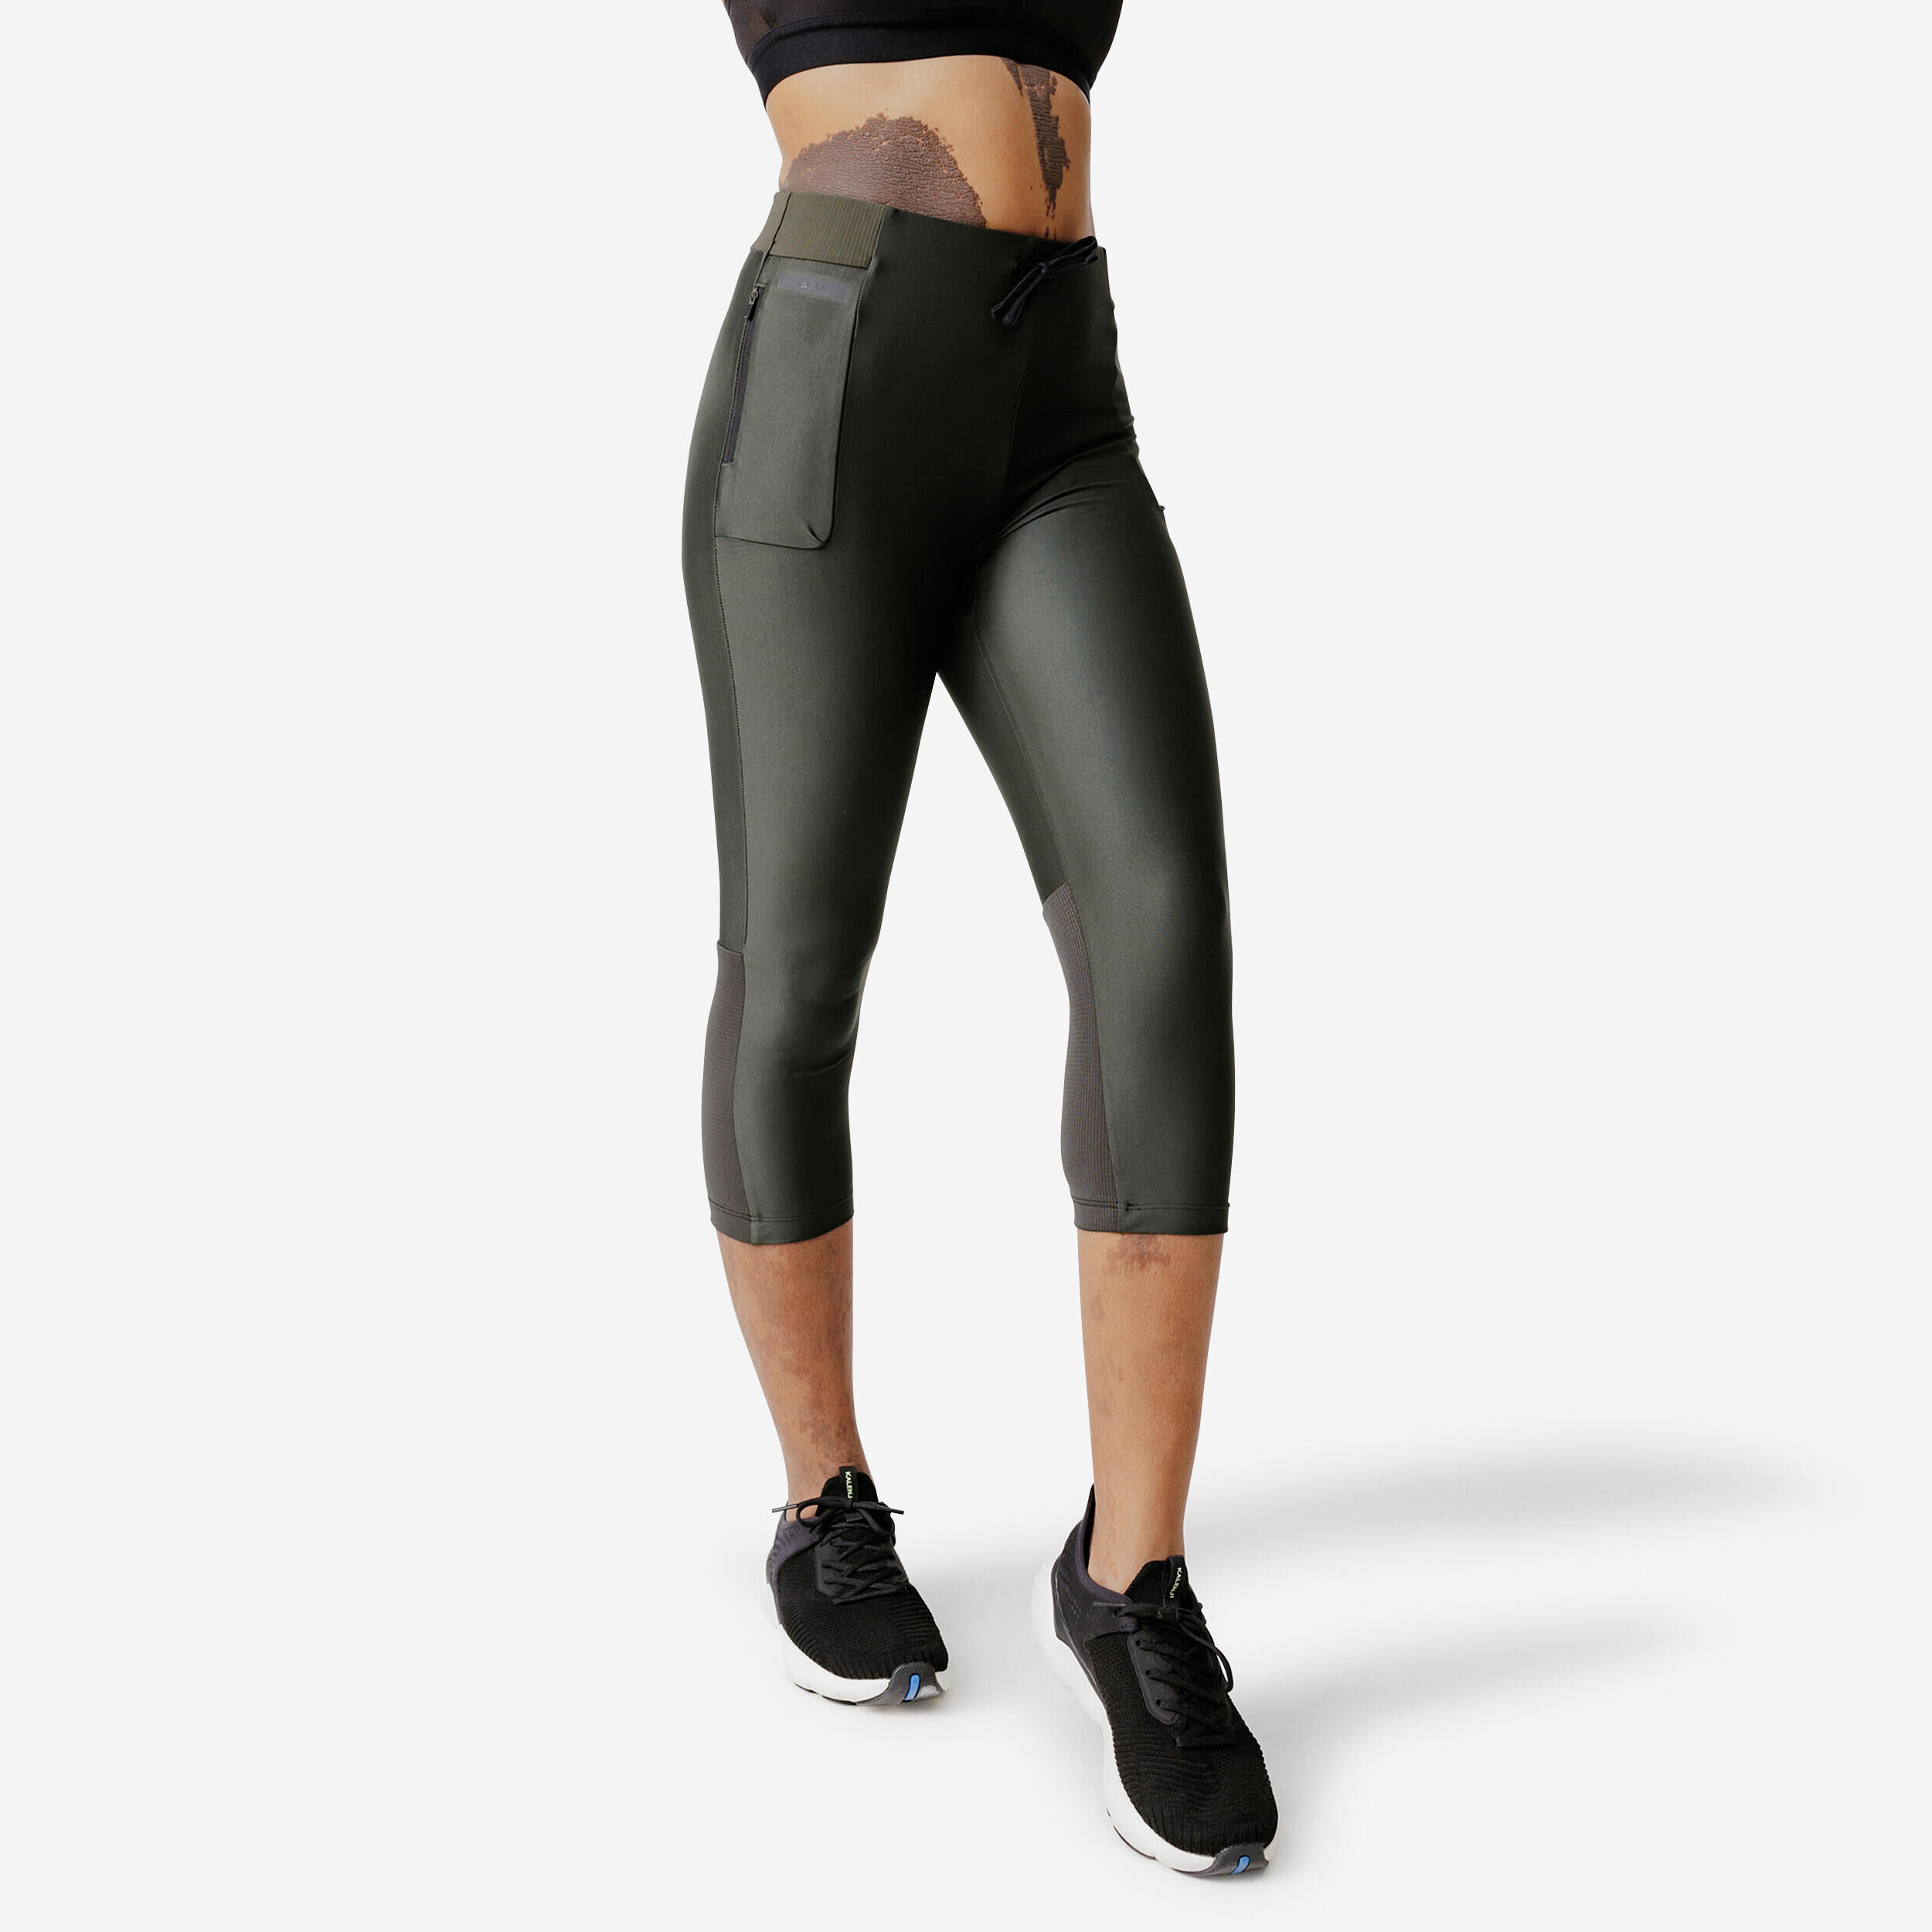 Women's Running Tights and Leggings